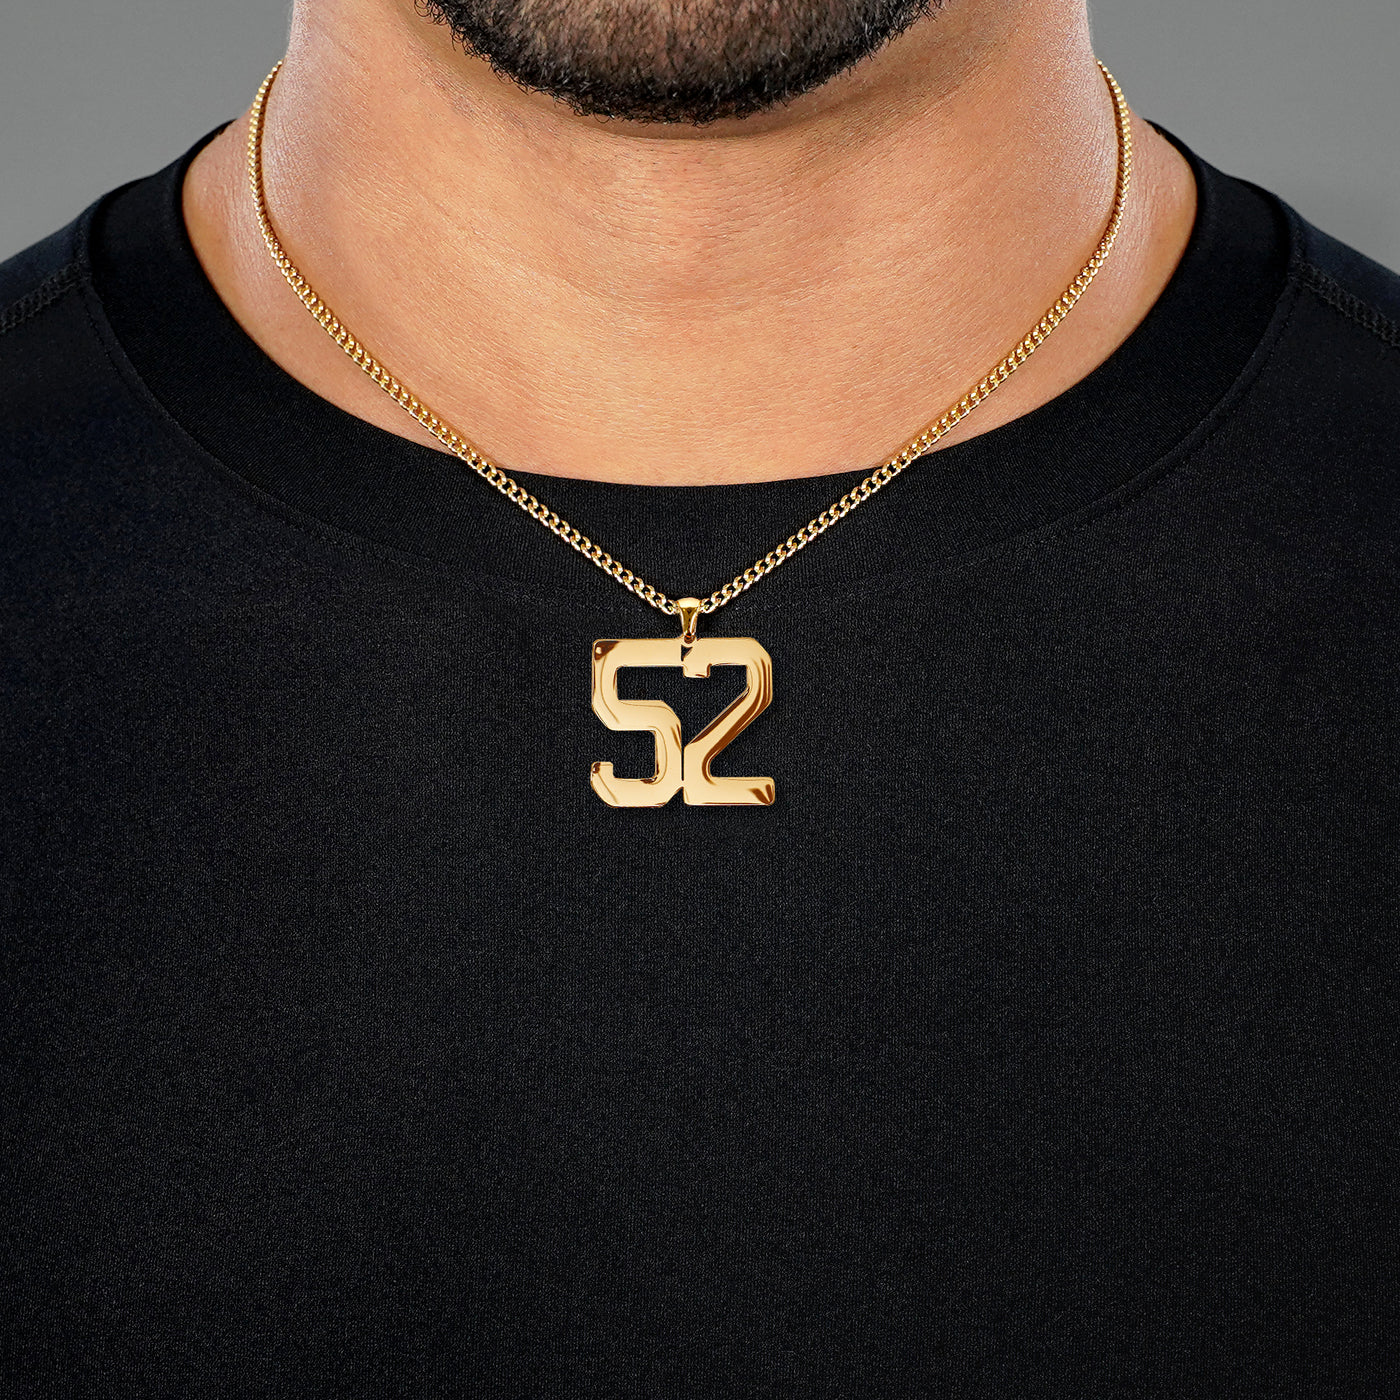 52 Number Pendant with Chain Necklace - Gold Plated Stainless Steel